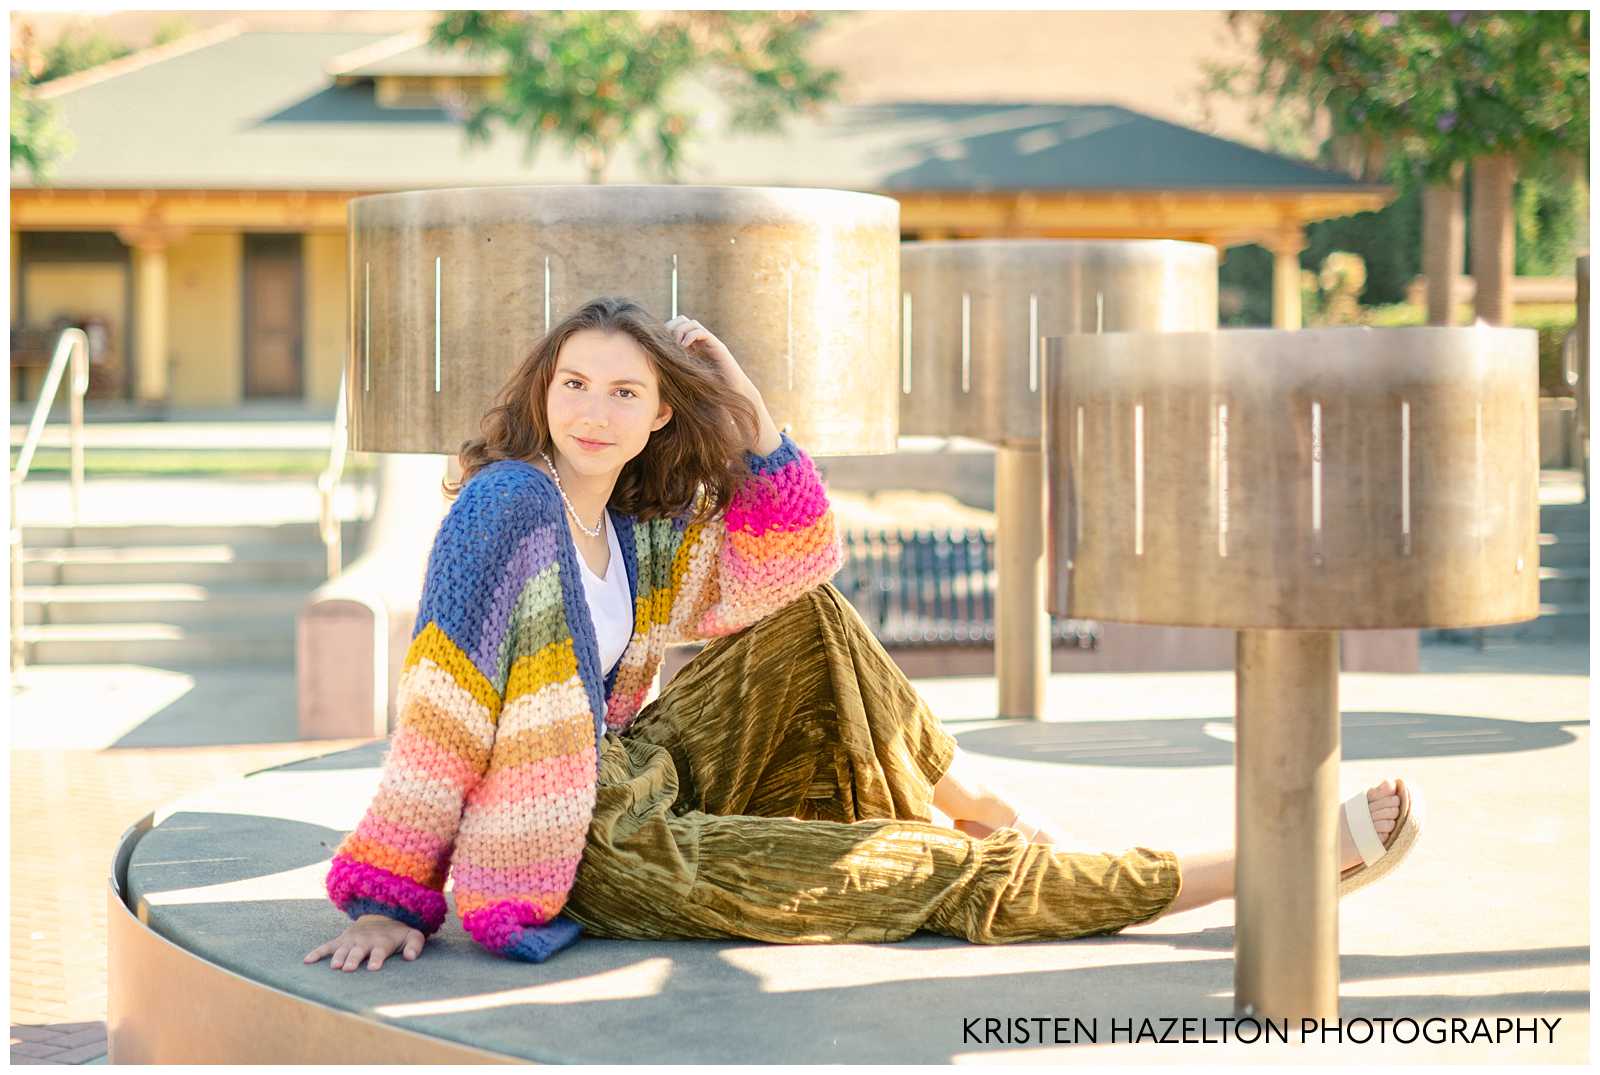 high school senior girl wearing a rainbow cardigan and seated next to zoetrope sculptures in Niles in Fremont, California